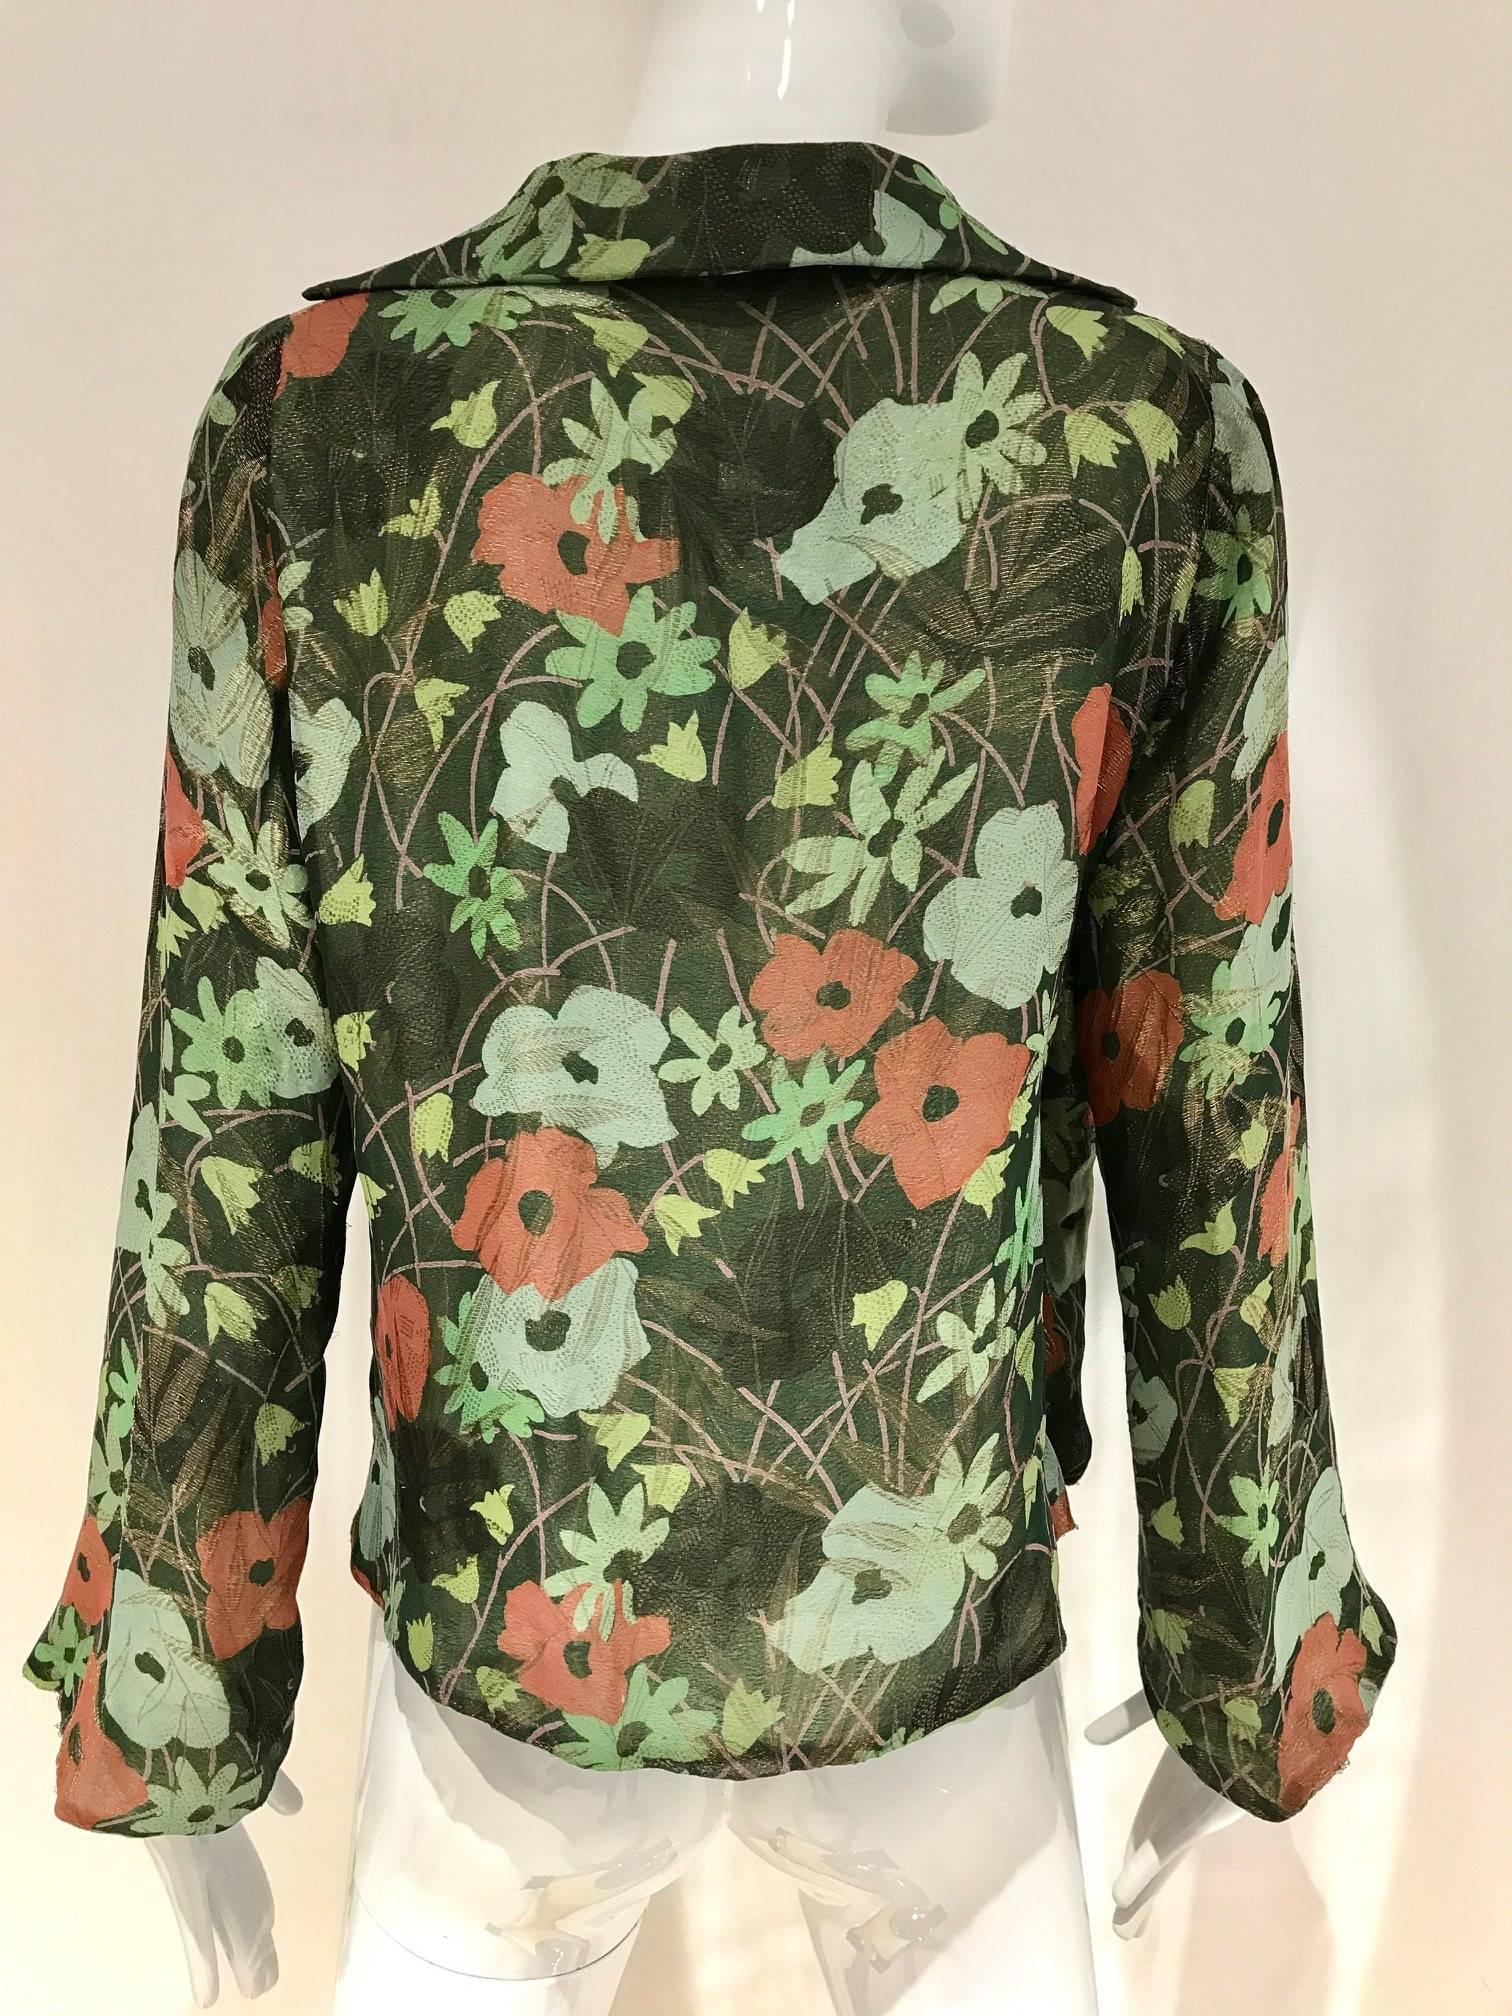 Antique 1920s art deco green, yellow, orange and metallic print floral print silk lamé light jacket . fit size 4/6. Medium size
 Perfect jacket for 1920s downton abbey costume party.
*** small stains inside lining and small thread coming undone on